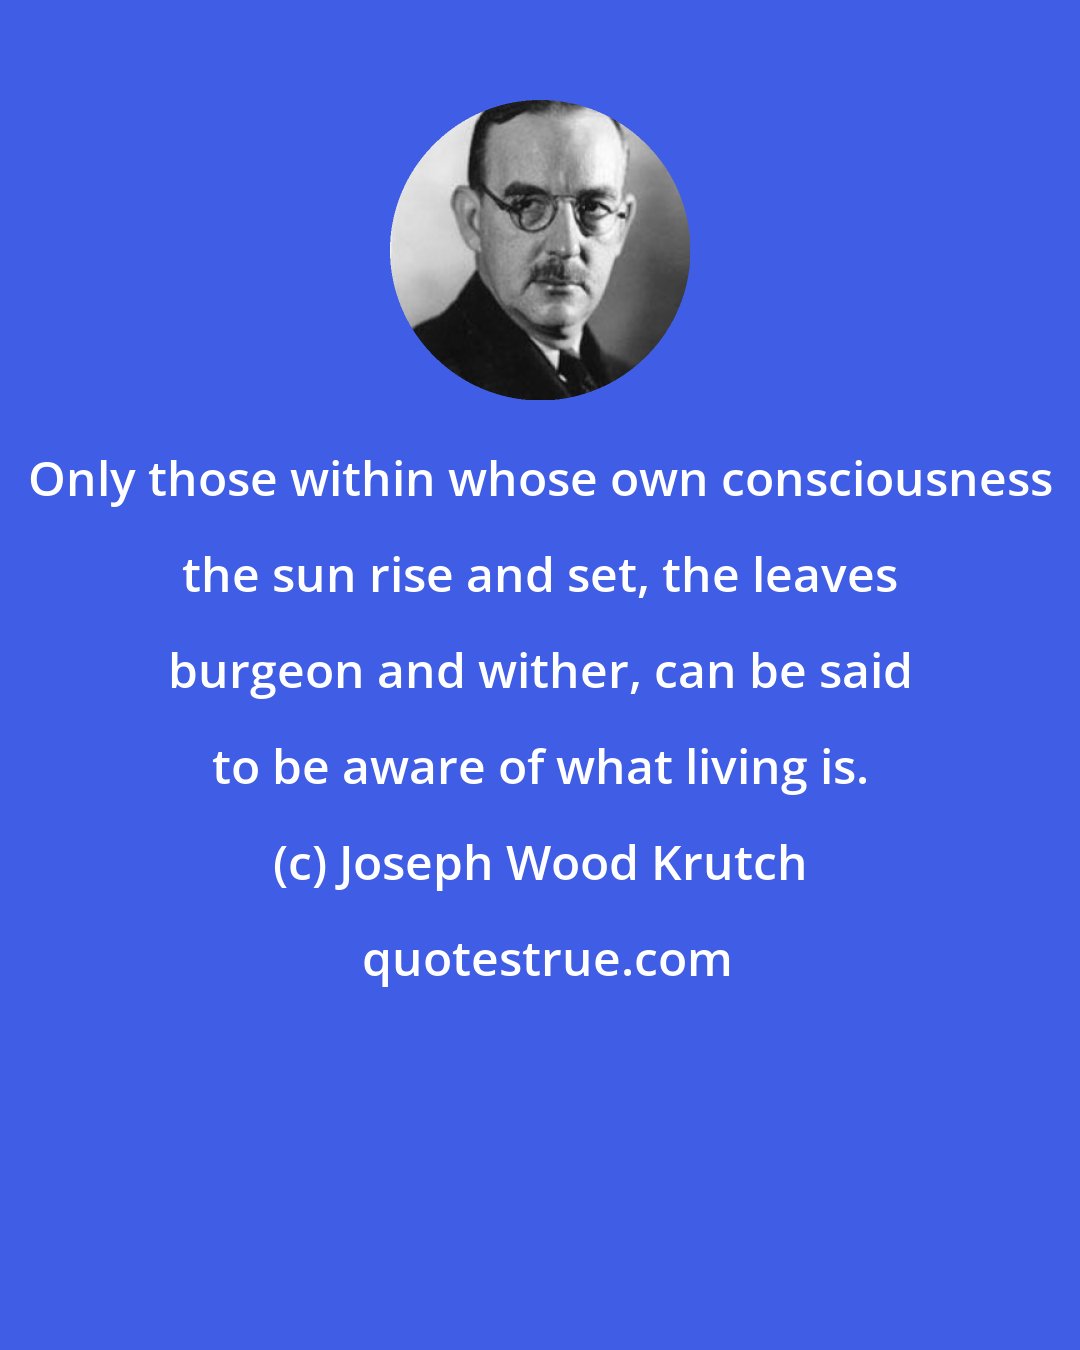 Joseph Wood Krutch: Only those within whose own consciousness the sun rise and set, the leaves burgeon and wither, can be said to be aware of what living is.